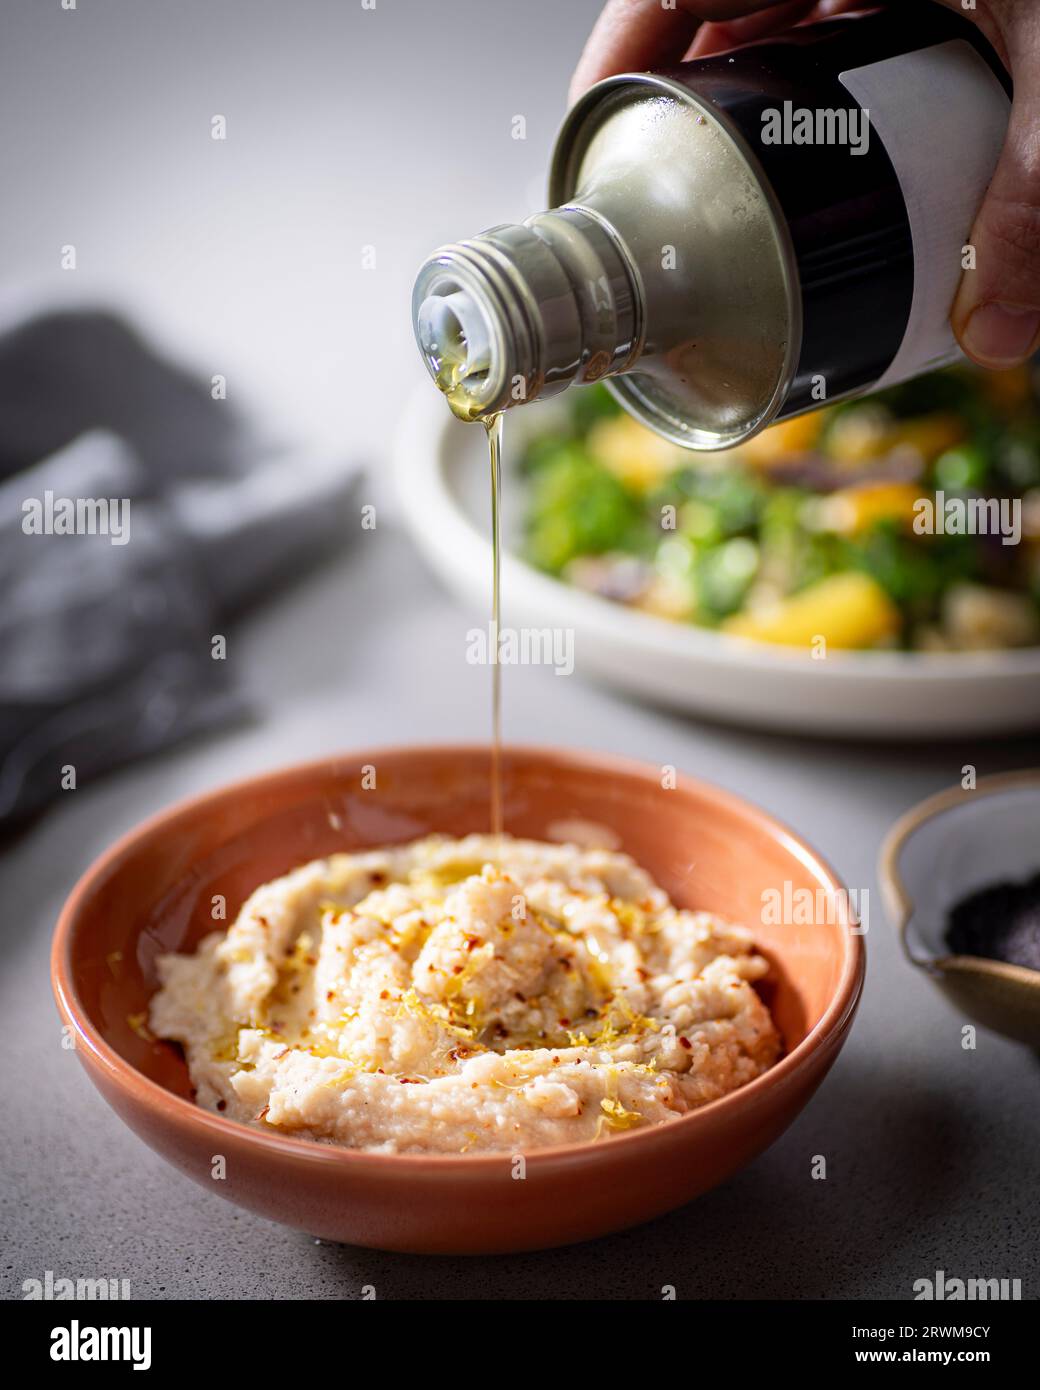 golden olive oil is delicately poured from a bottle onto a bowl filled with creamy hummus. In the background, a plate of fresh vegetables adds to the Stock Photo